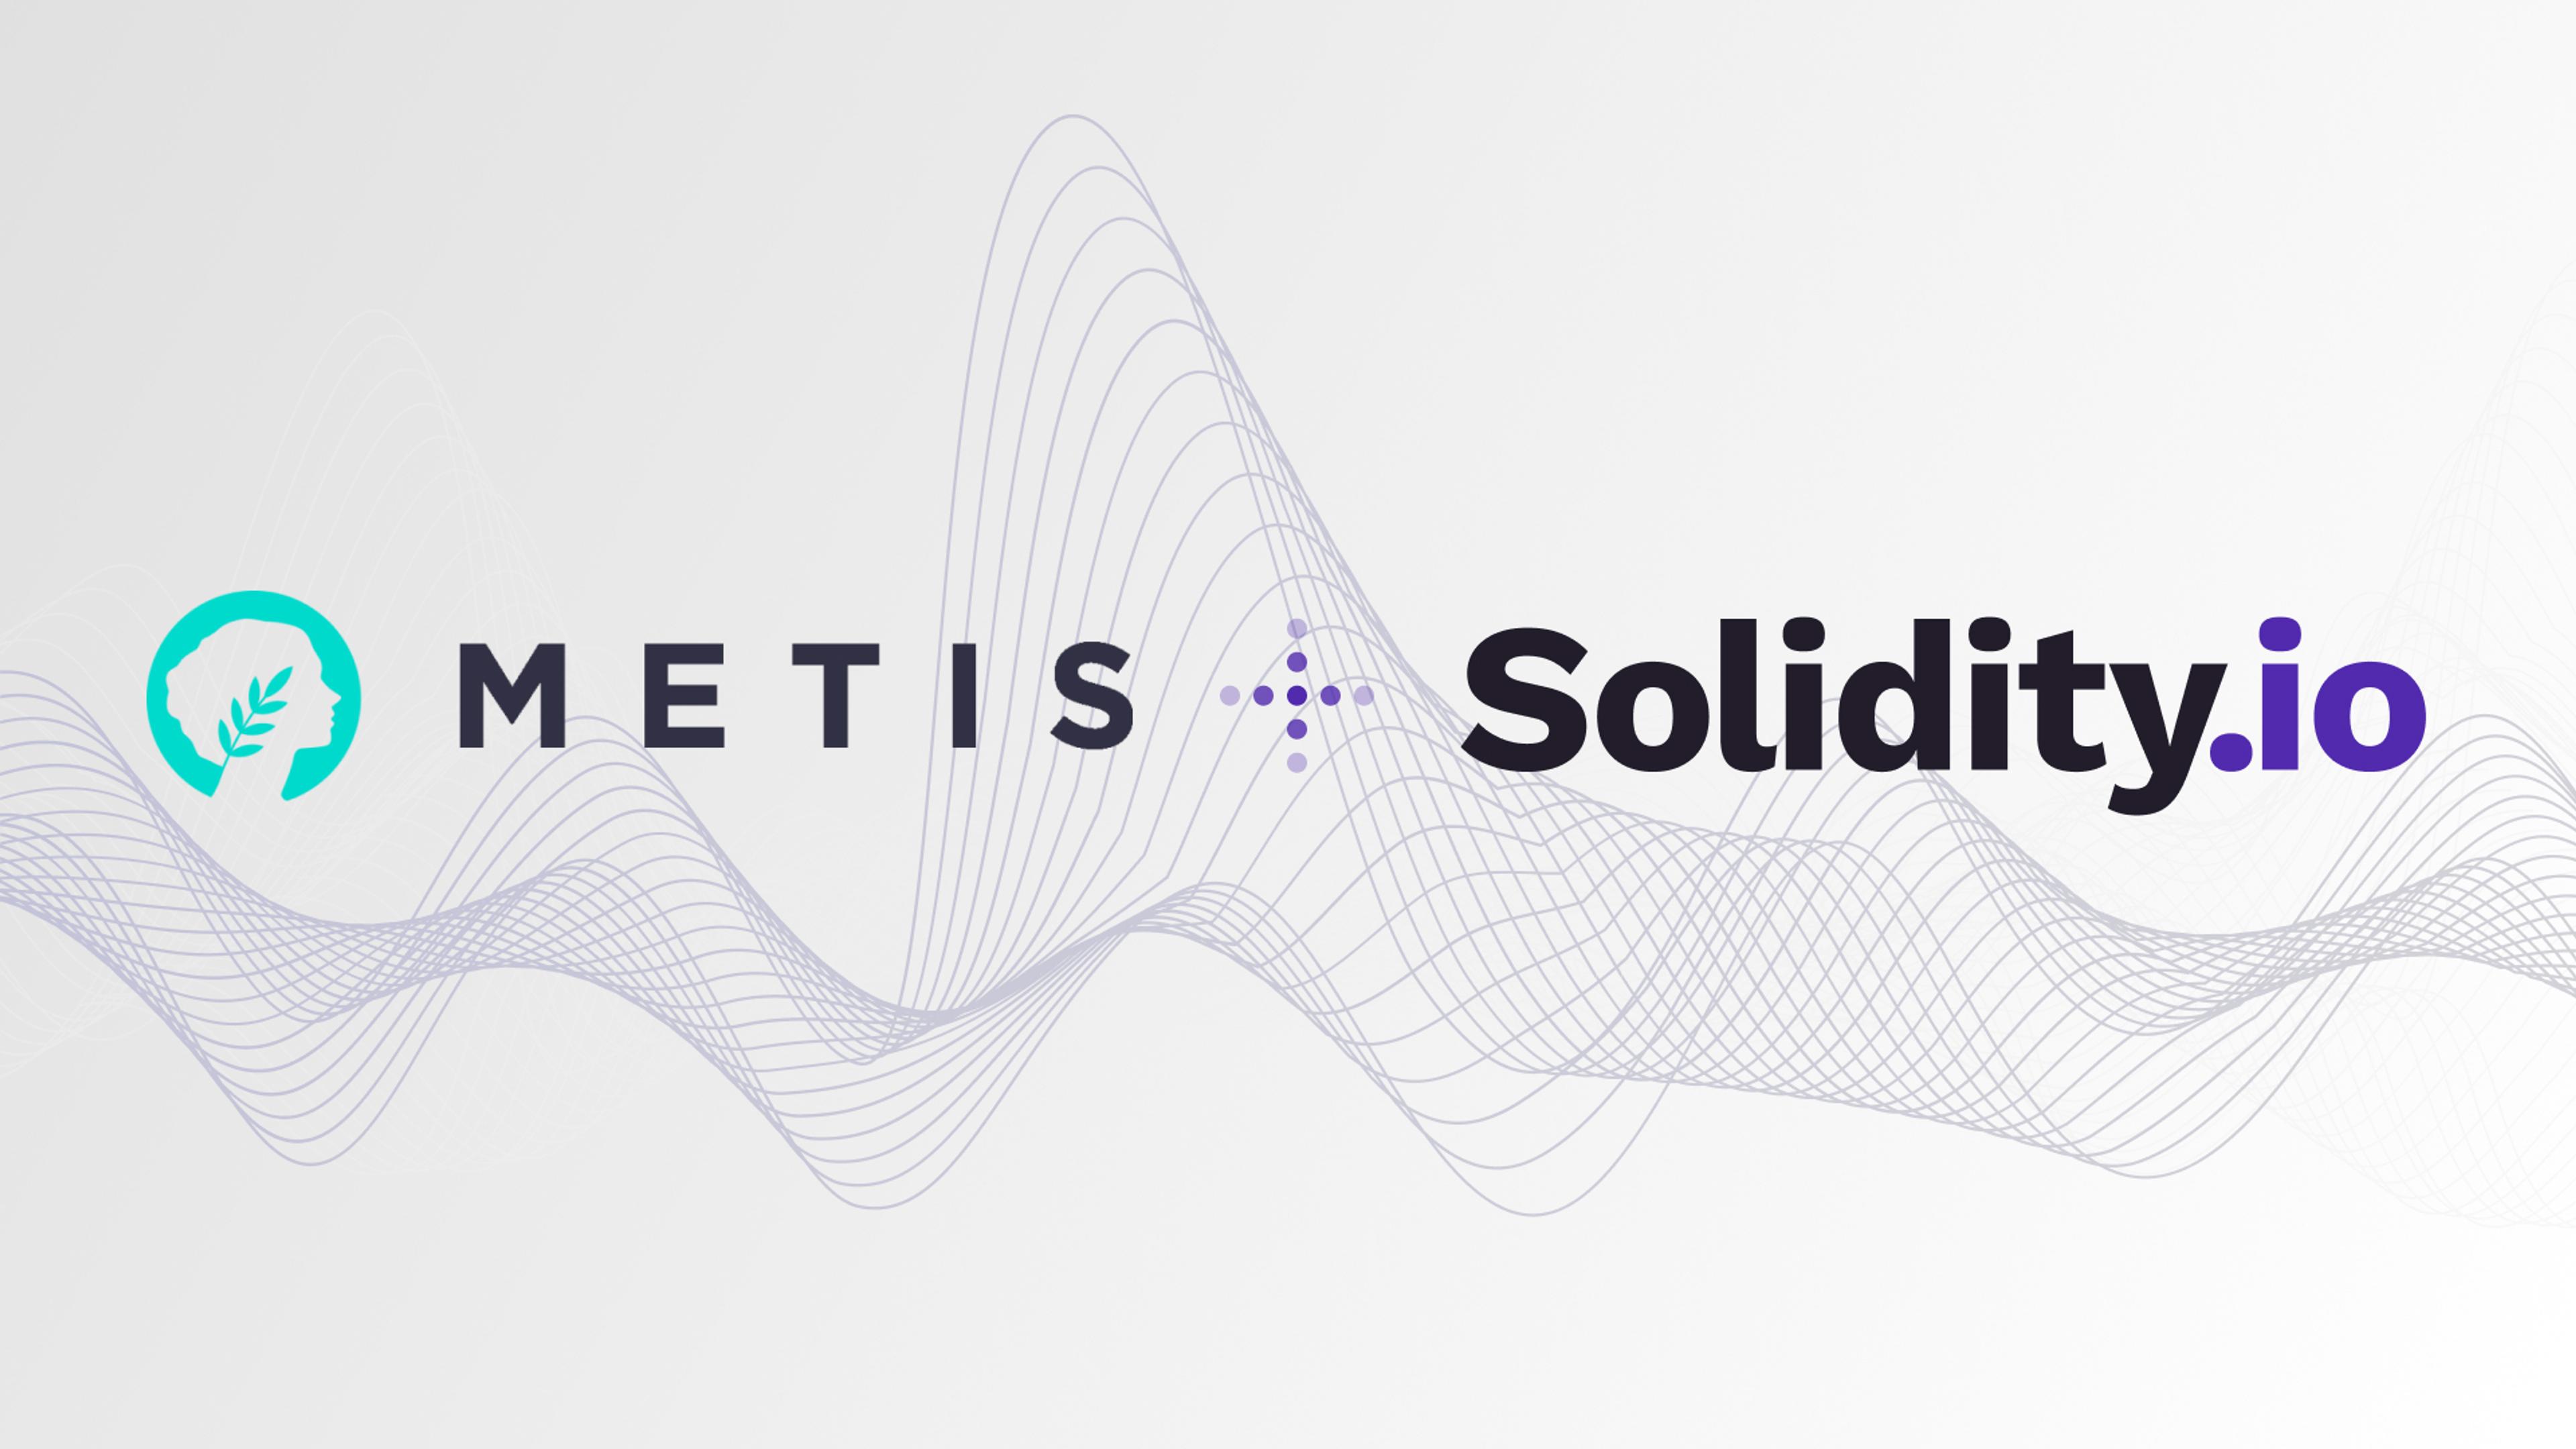 Metis Layer 2 and Solidity.io to Facilitate Web2 to Web3 Migration